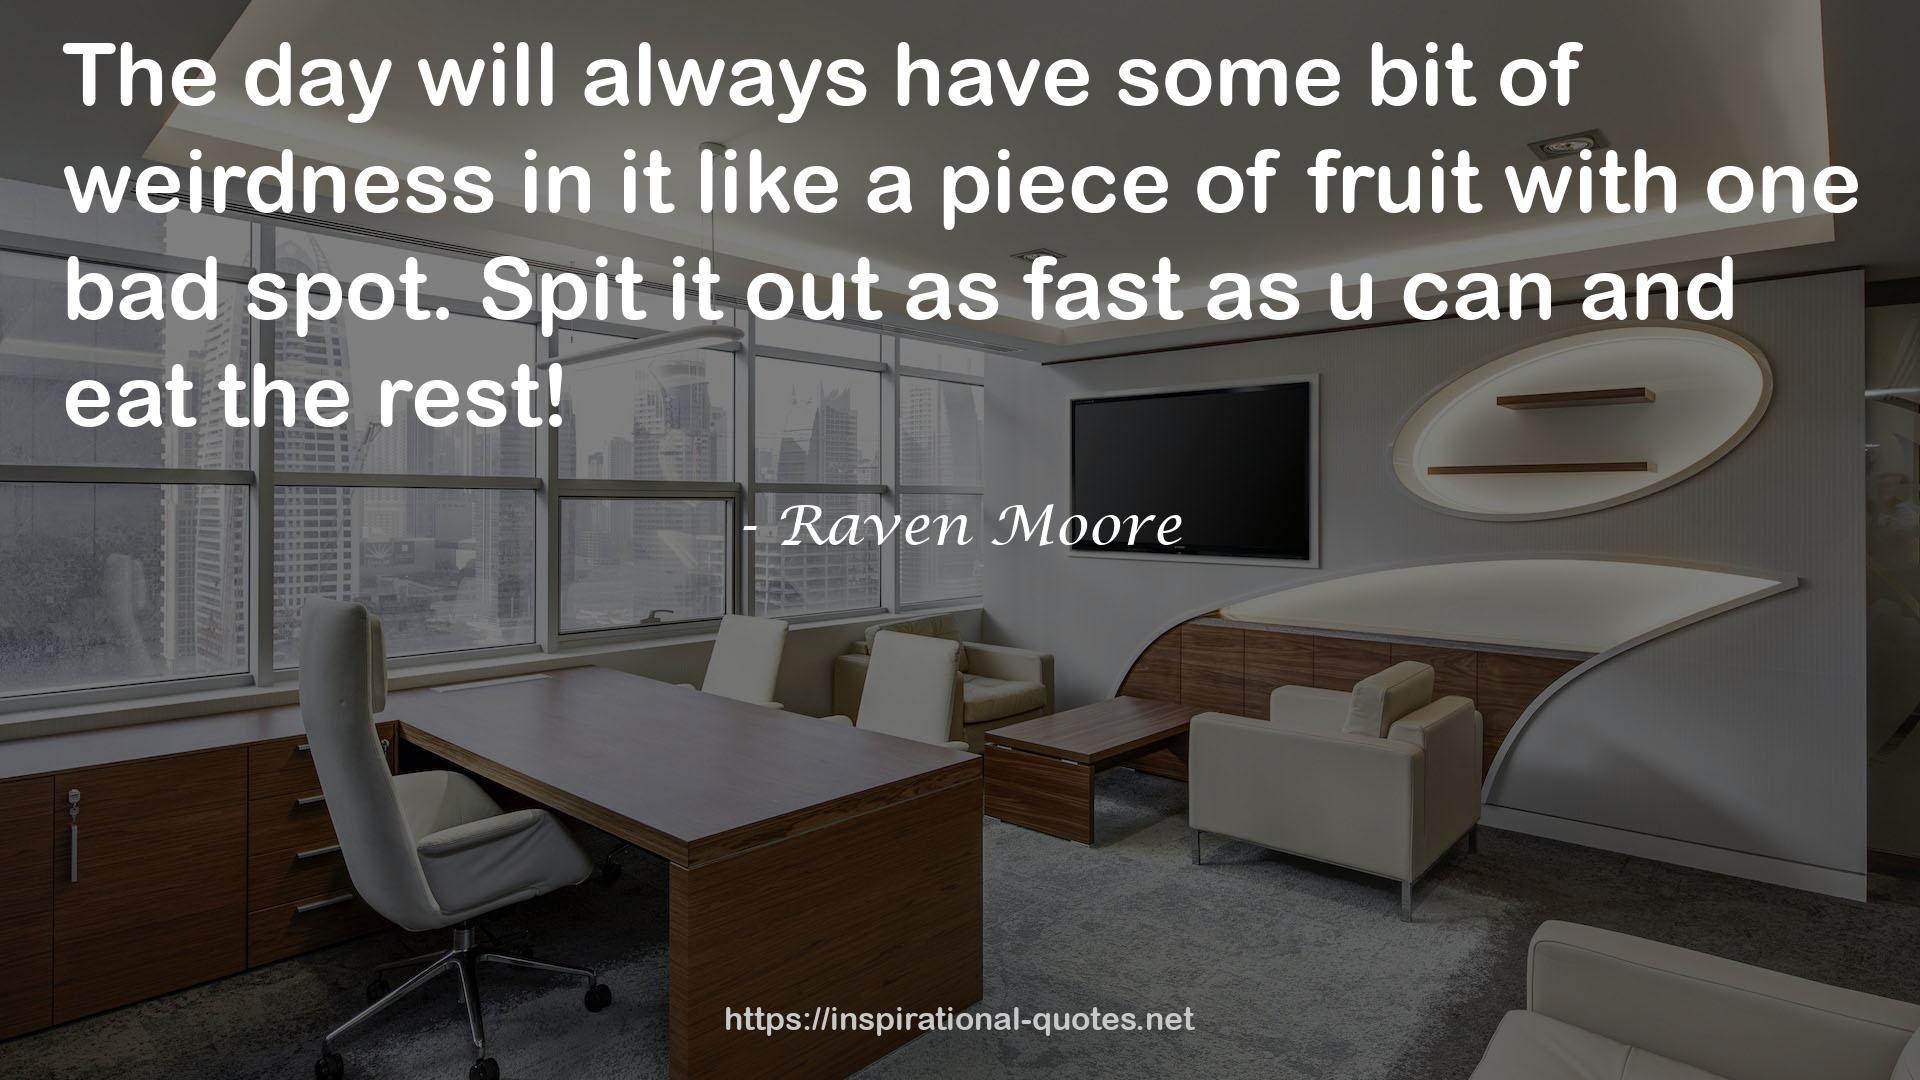 Raven Moore QUOTES